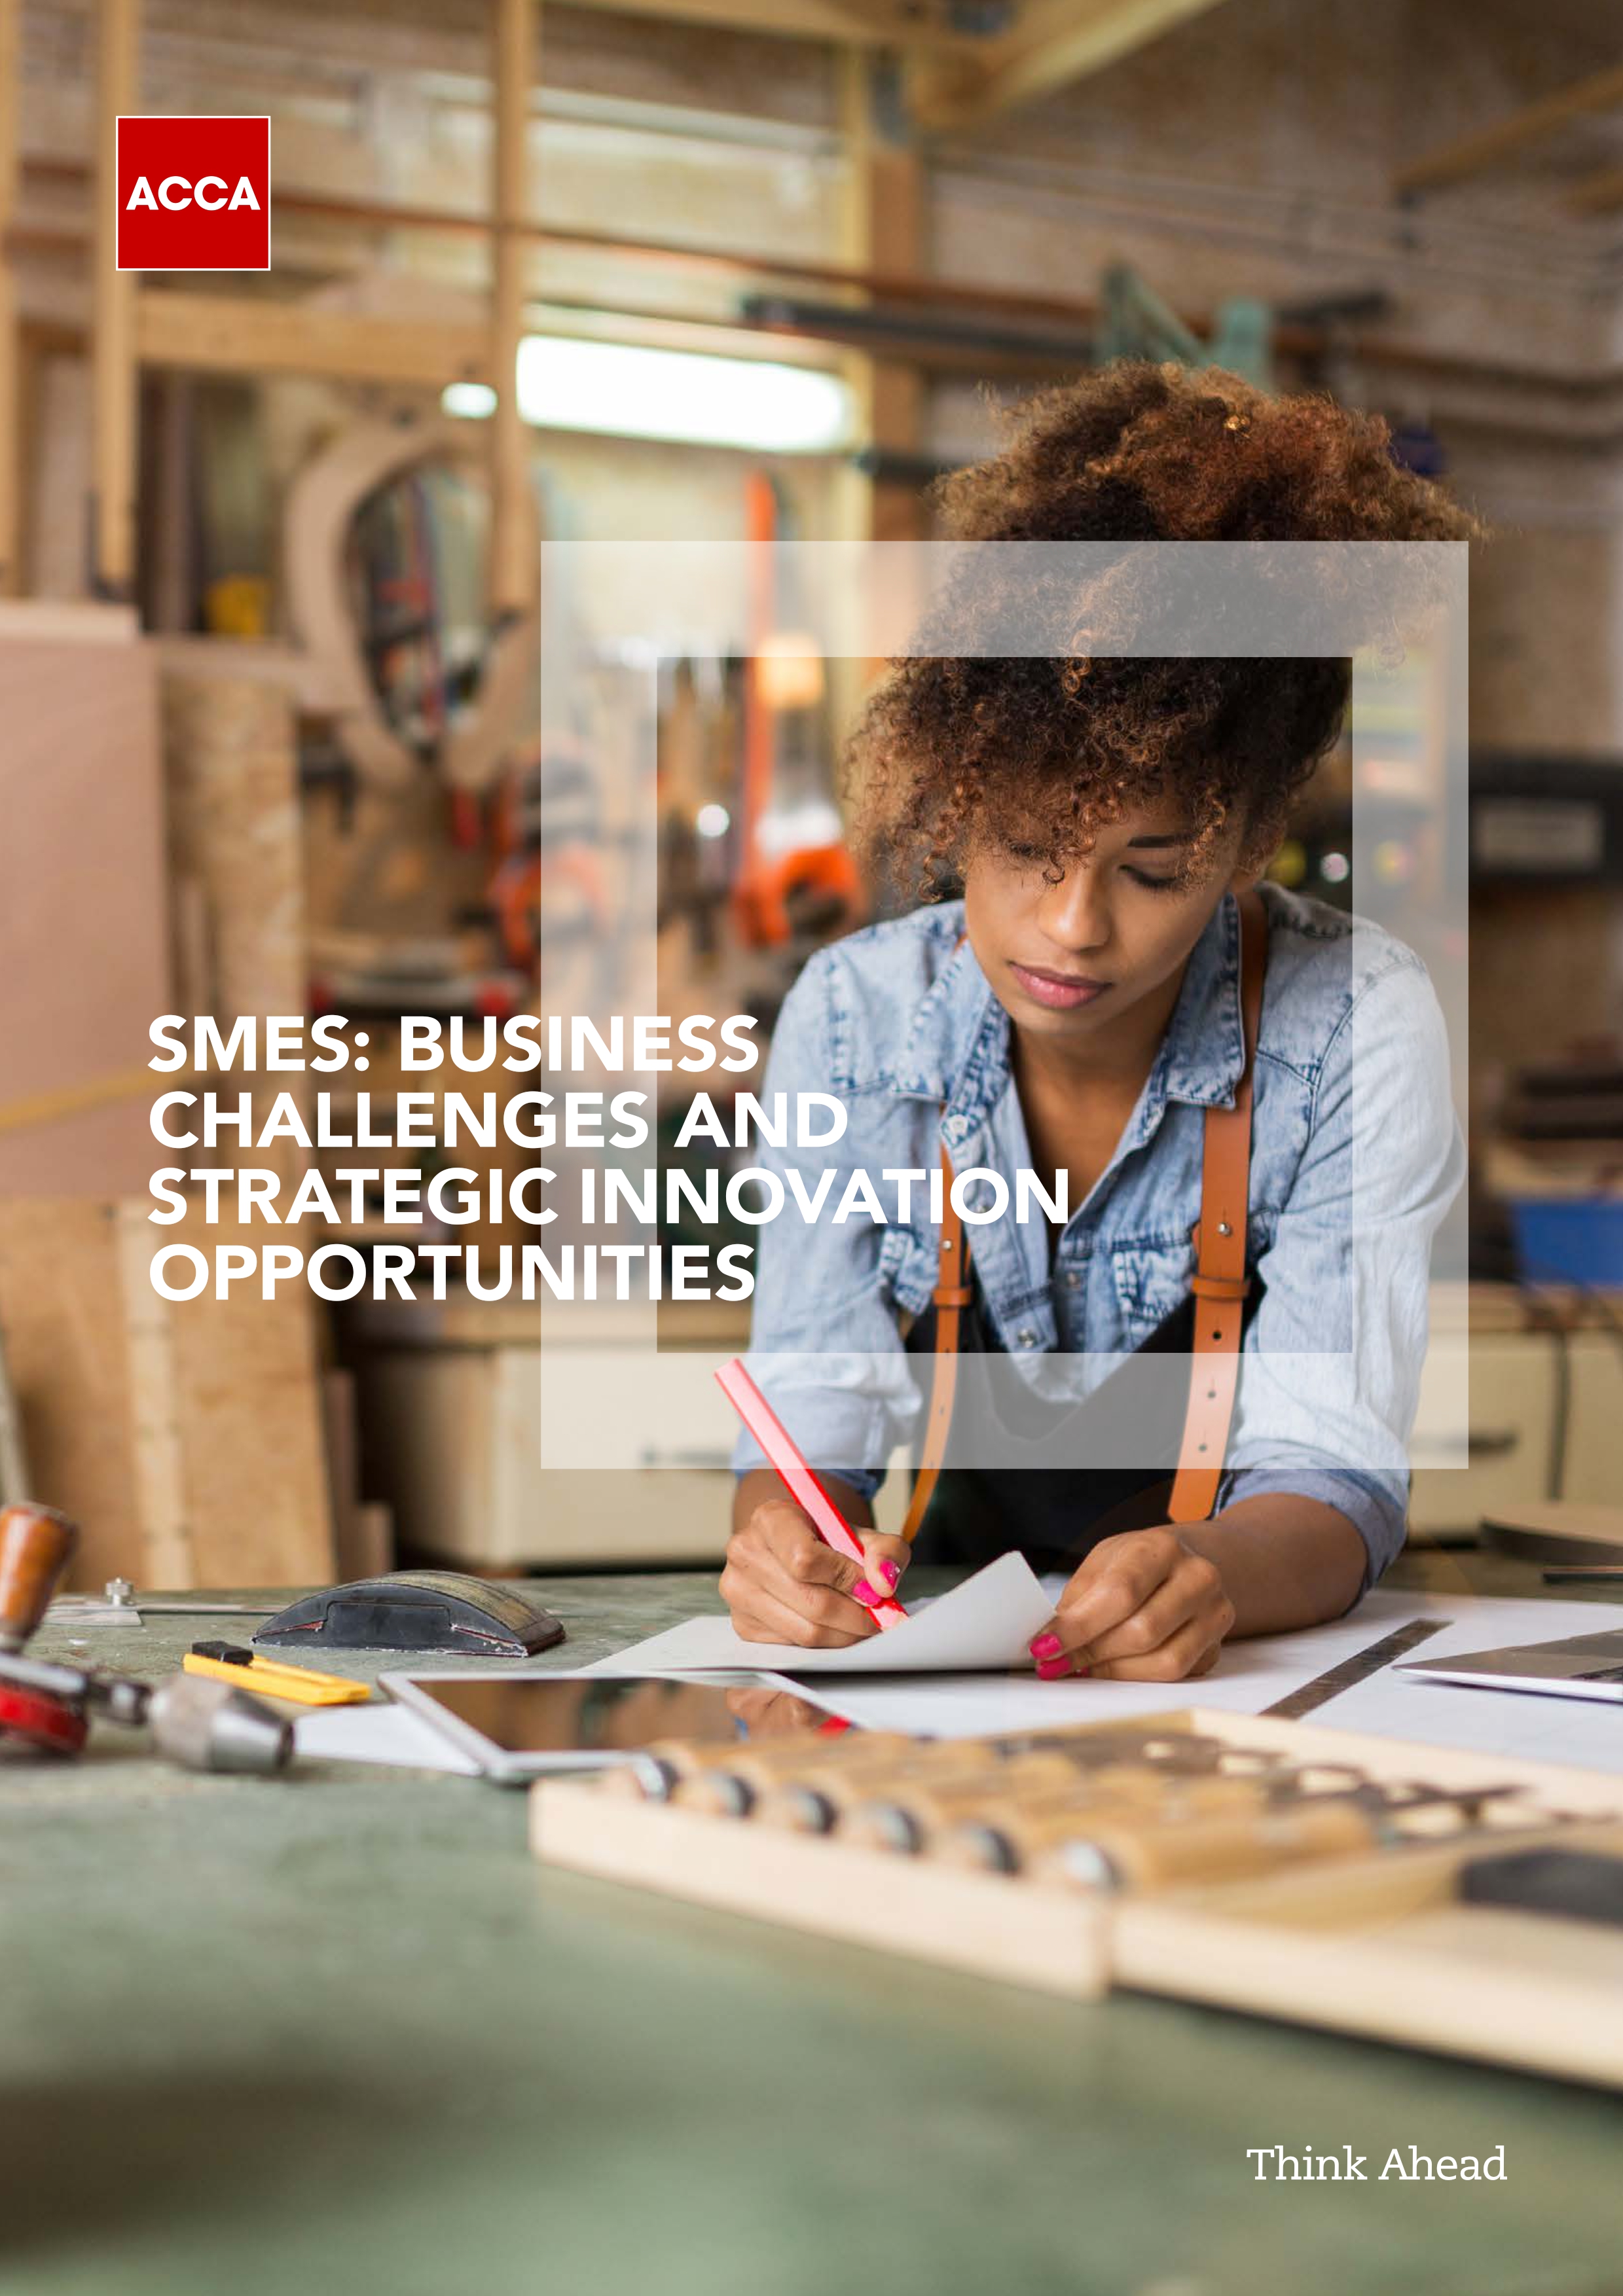 SMES: BUSINESS CHALLENGES AND STRATEGIC INNOVATION OPPORTUNITIES